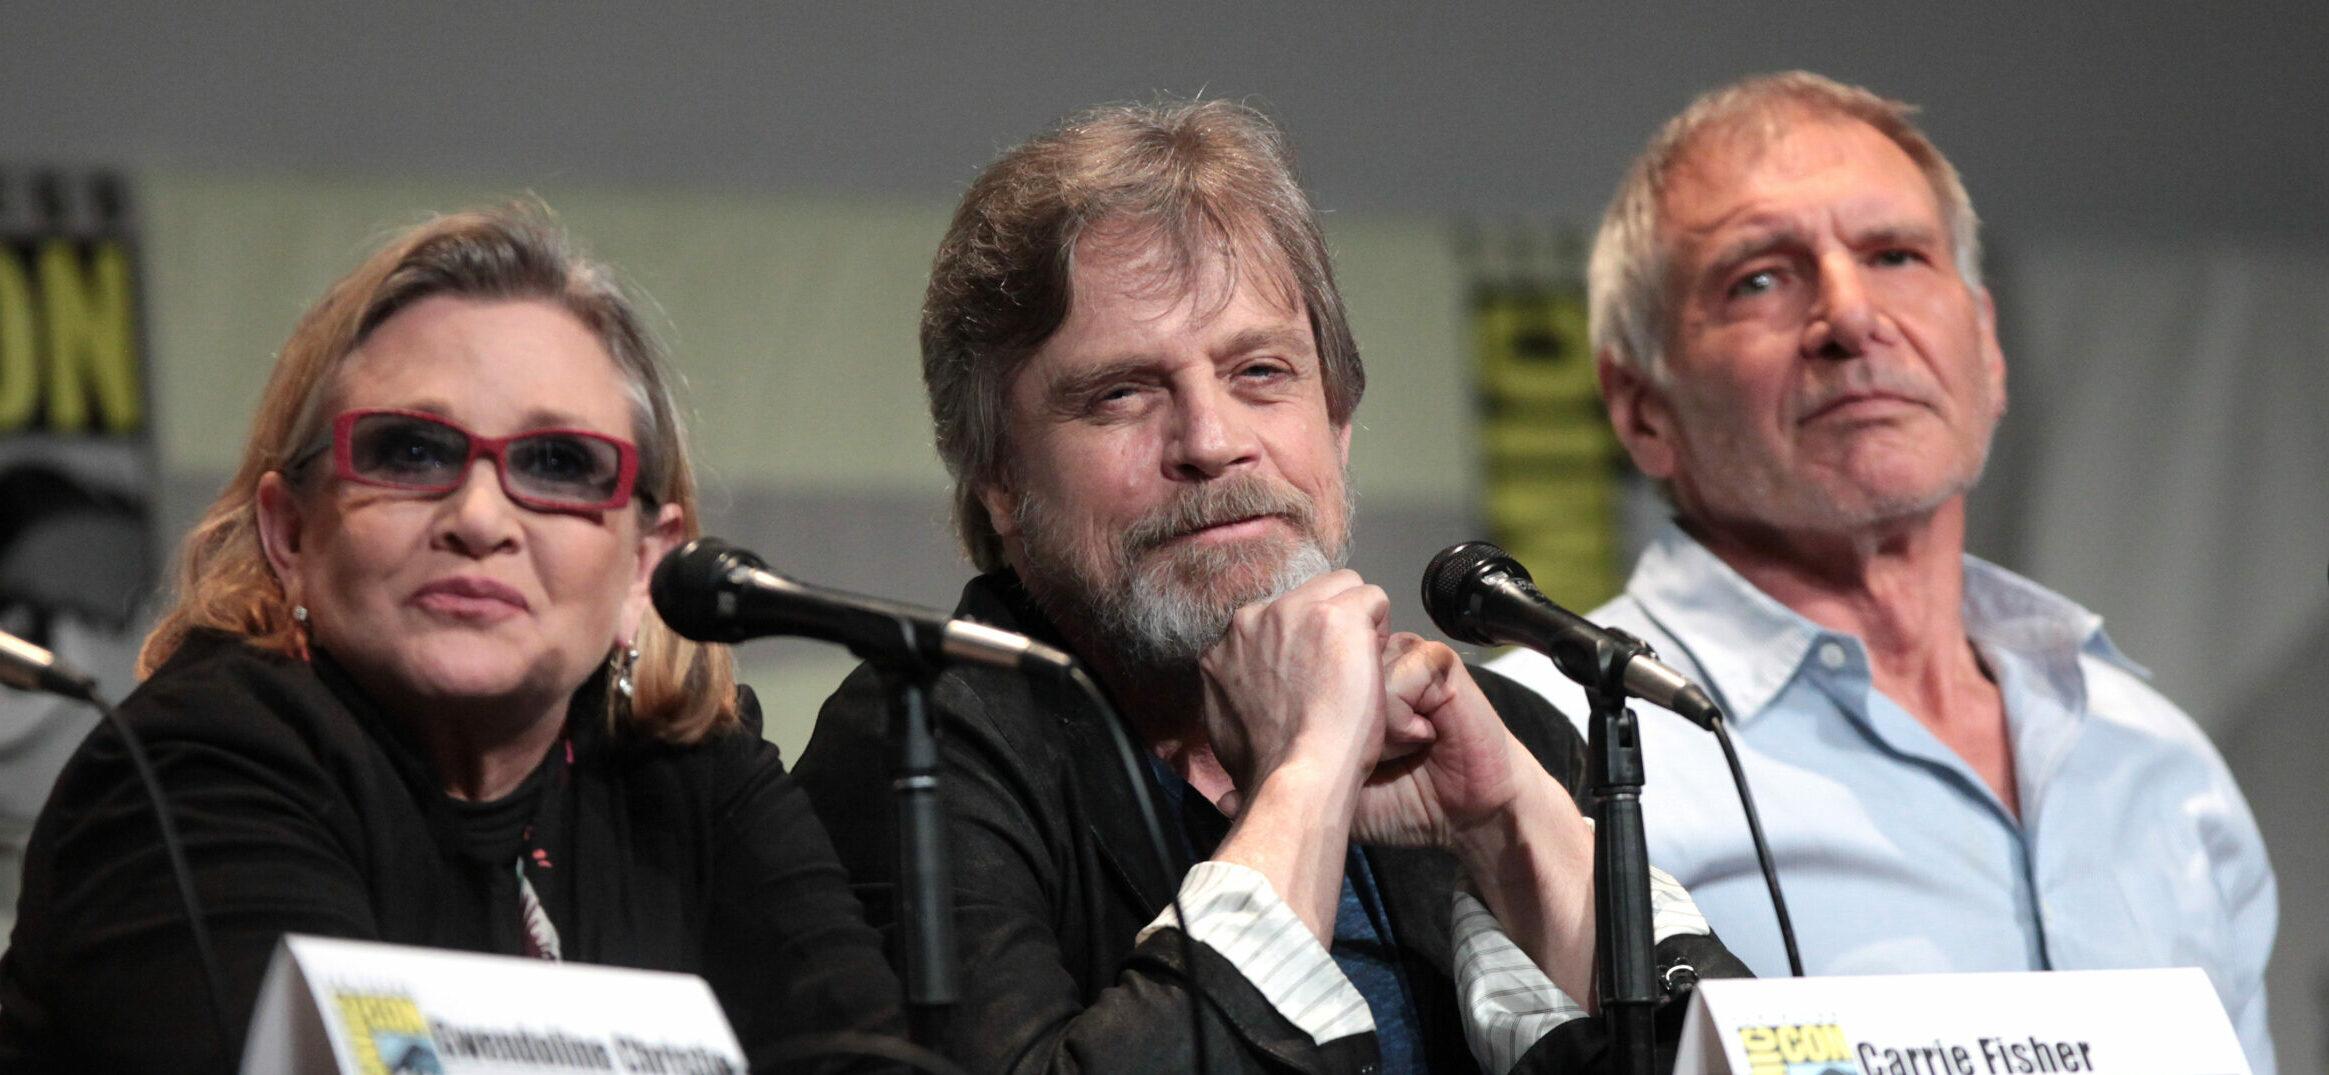 How Much The Original ‘Star Wars’ Cast Made For ‘A New Hope’